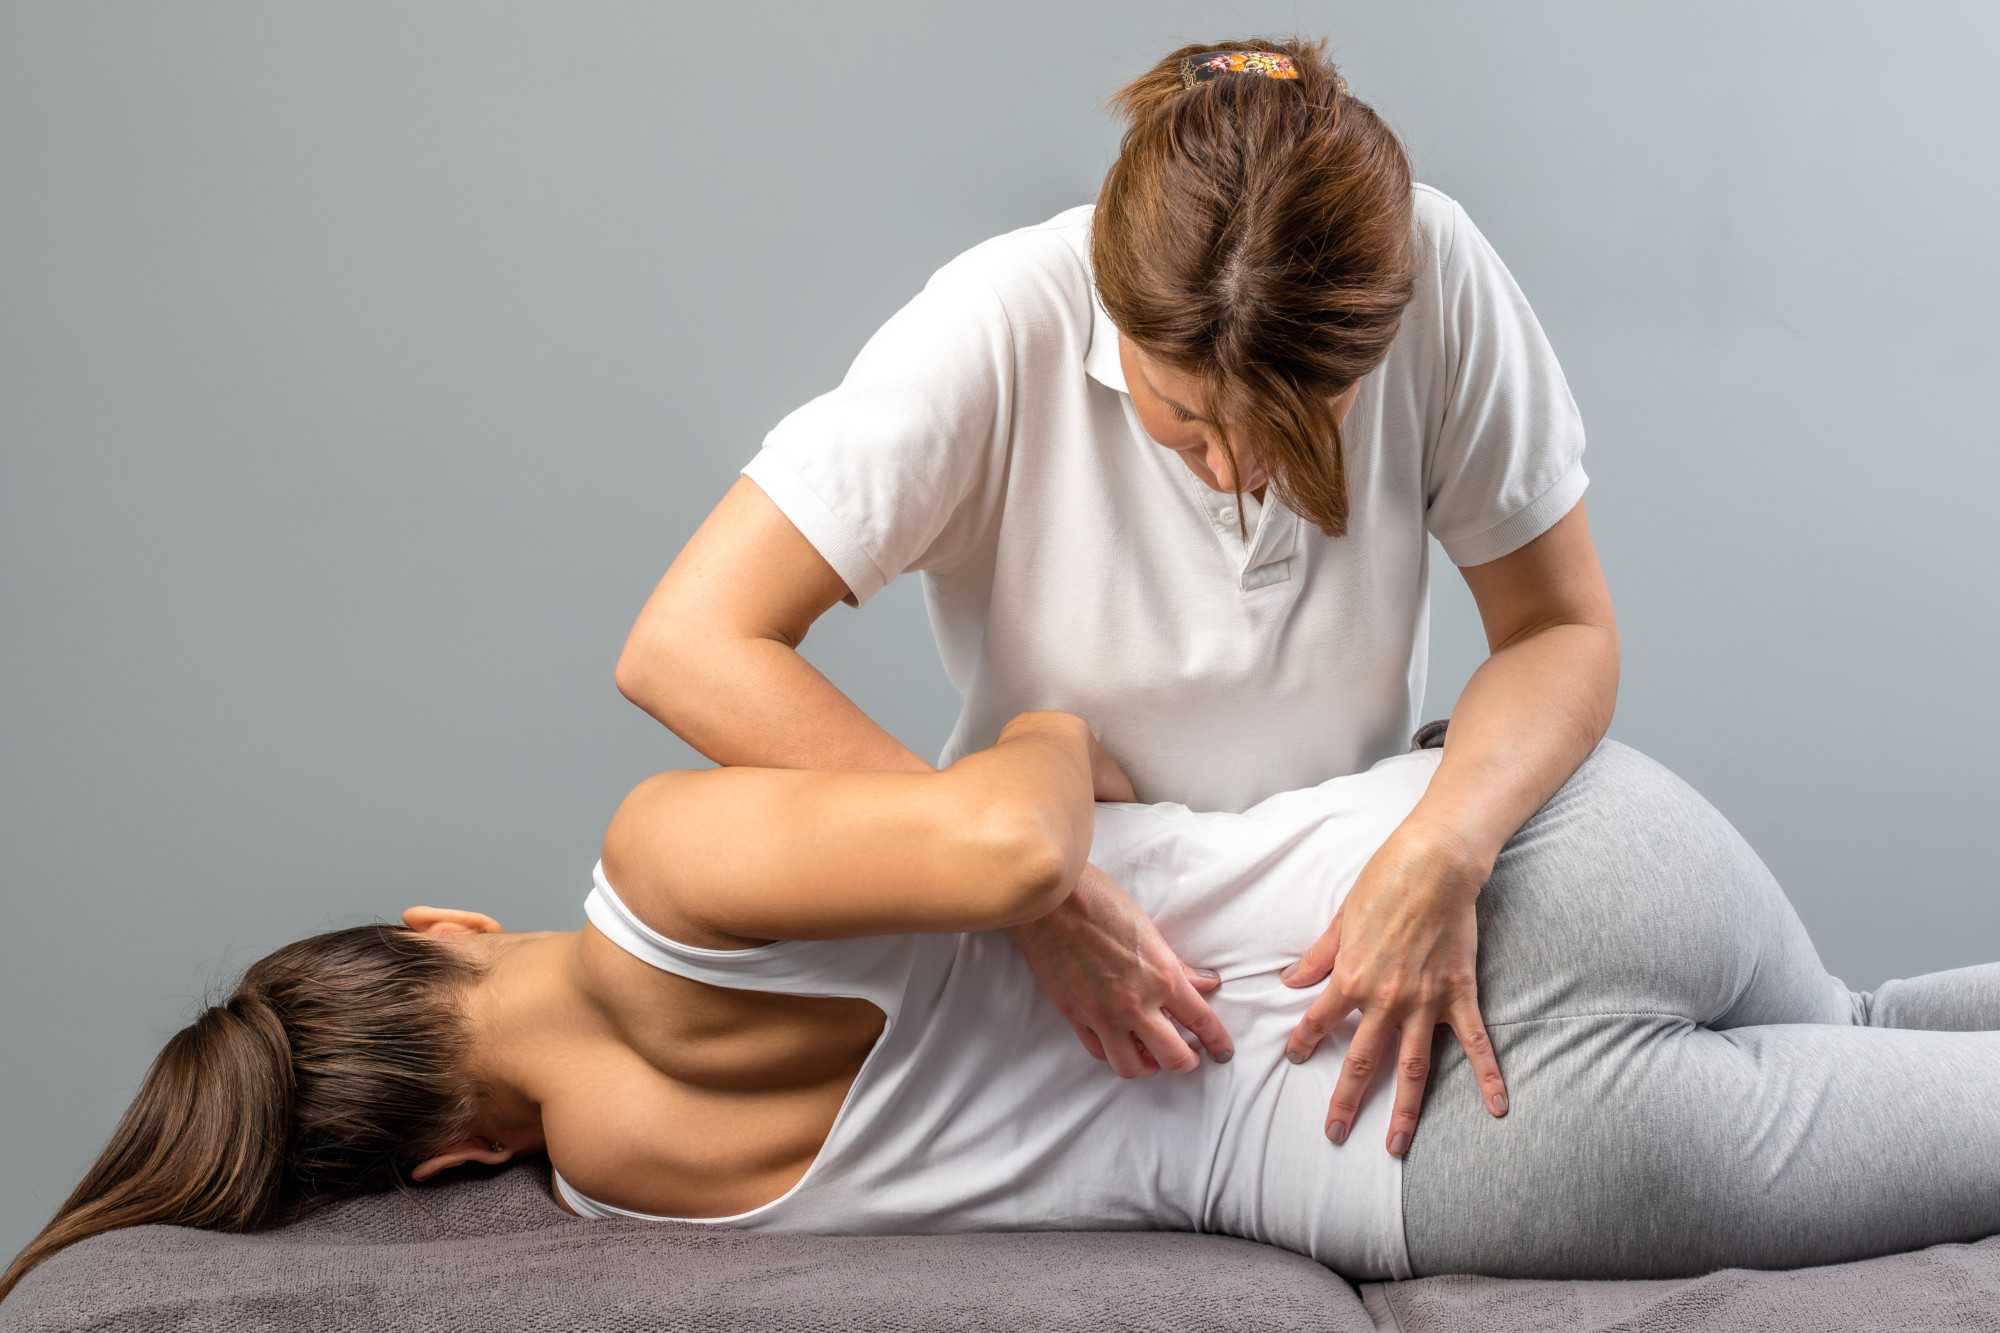 Chiropractic Care Has Benefits You May Not Know